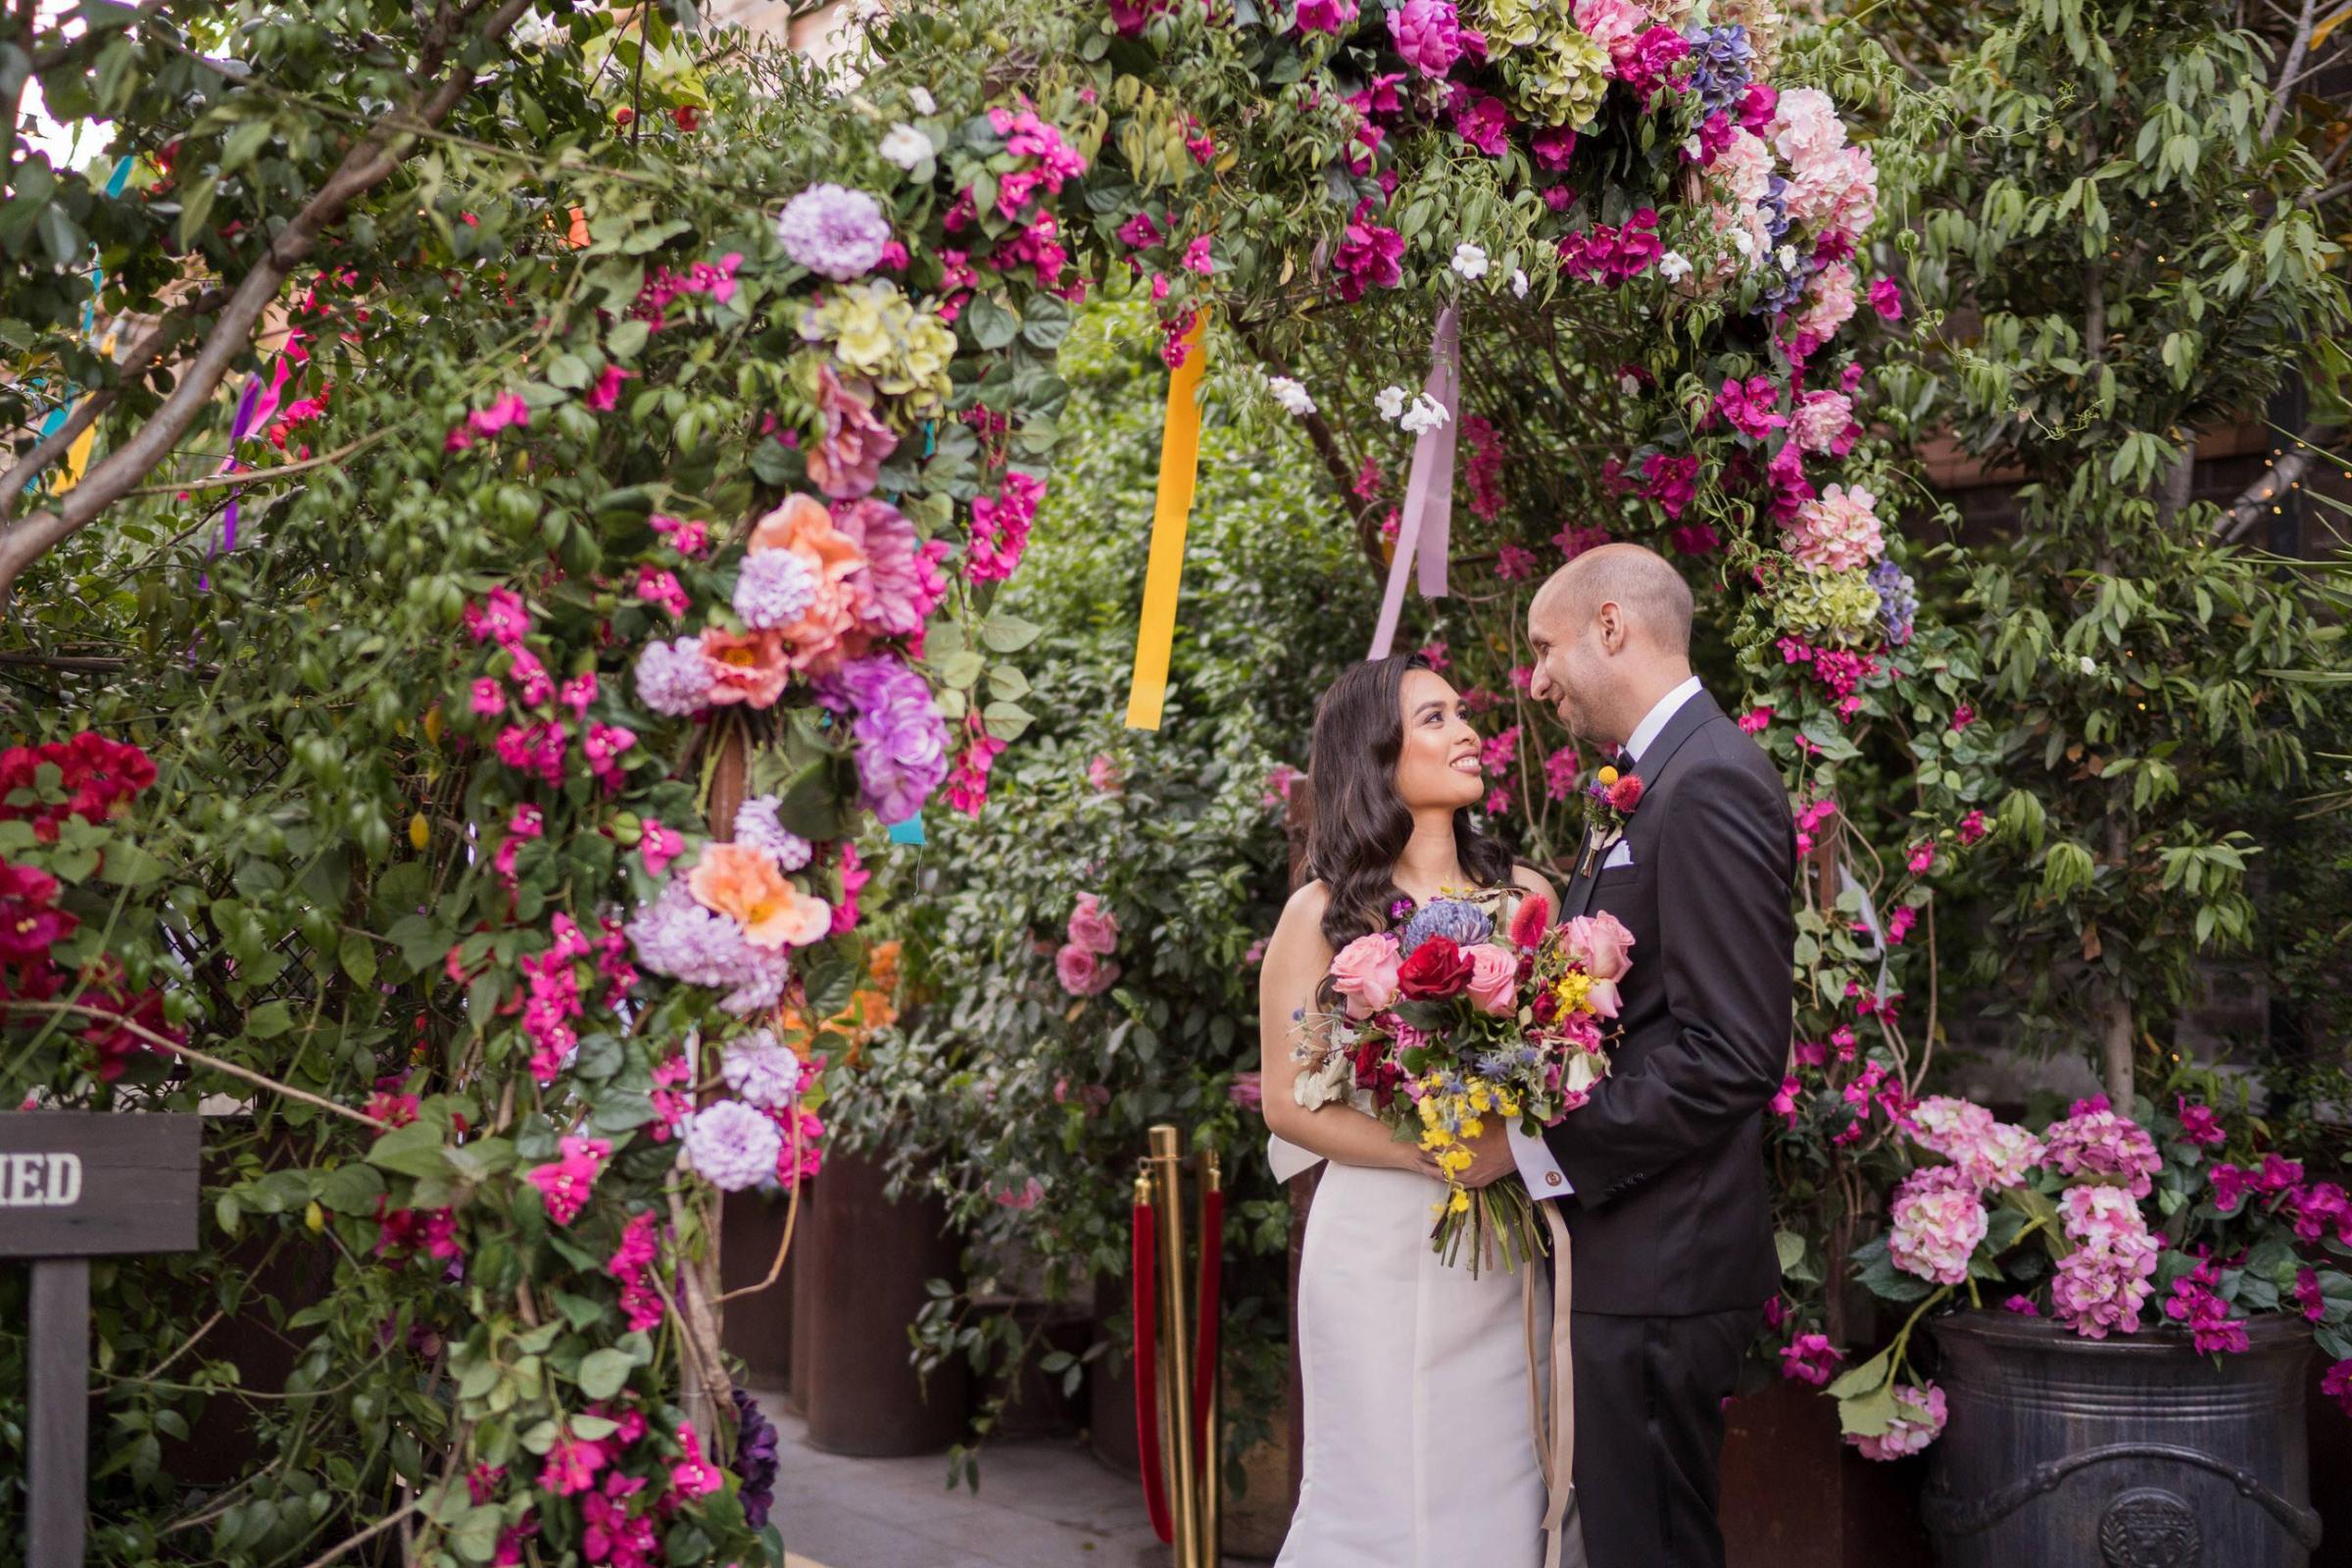 The wedding gate was done with super bright florals and ribbons